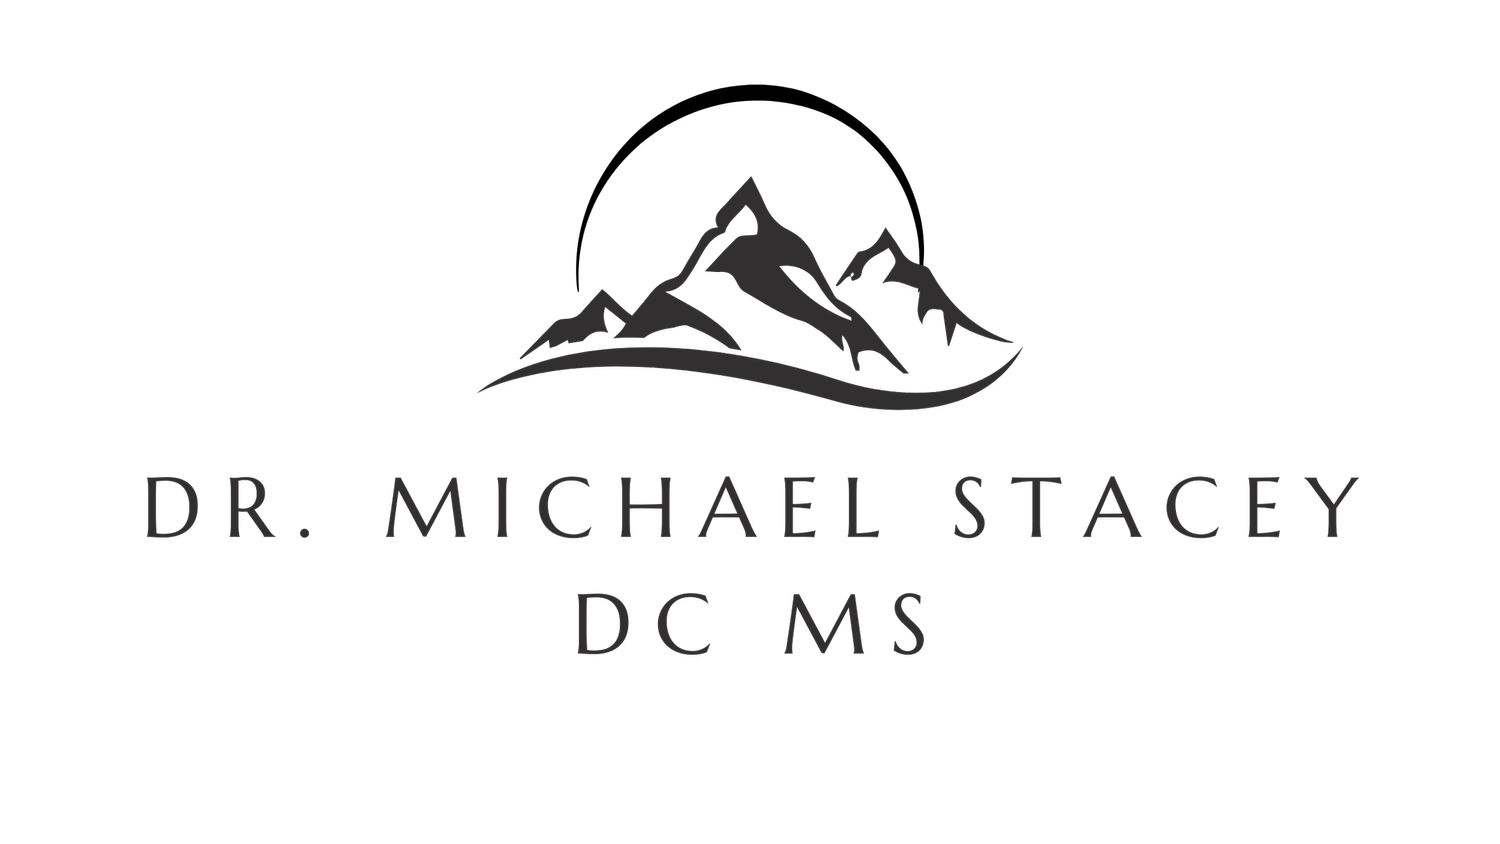 Dr. Michael Stacey, DC, MS